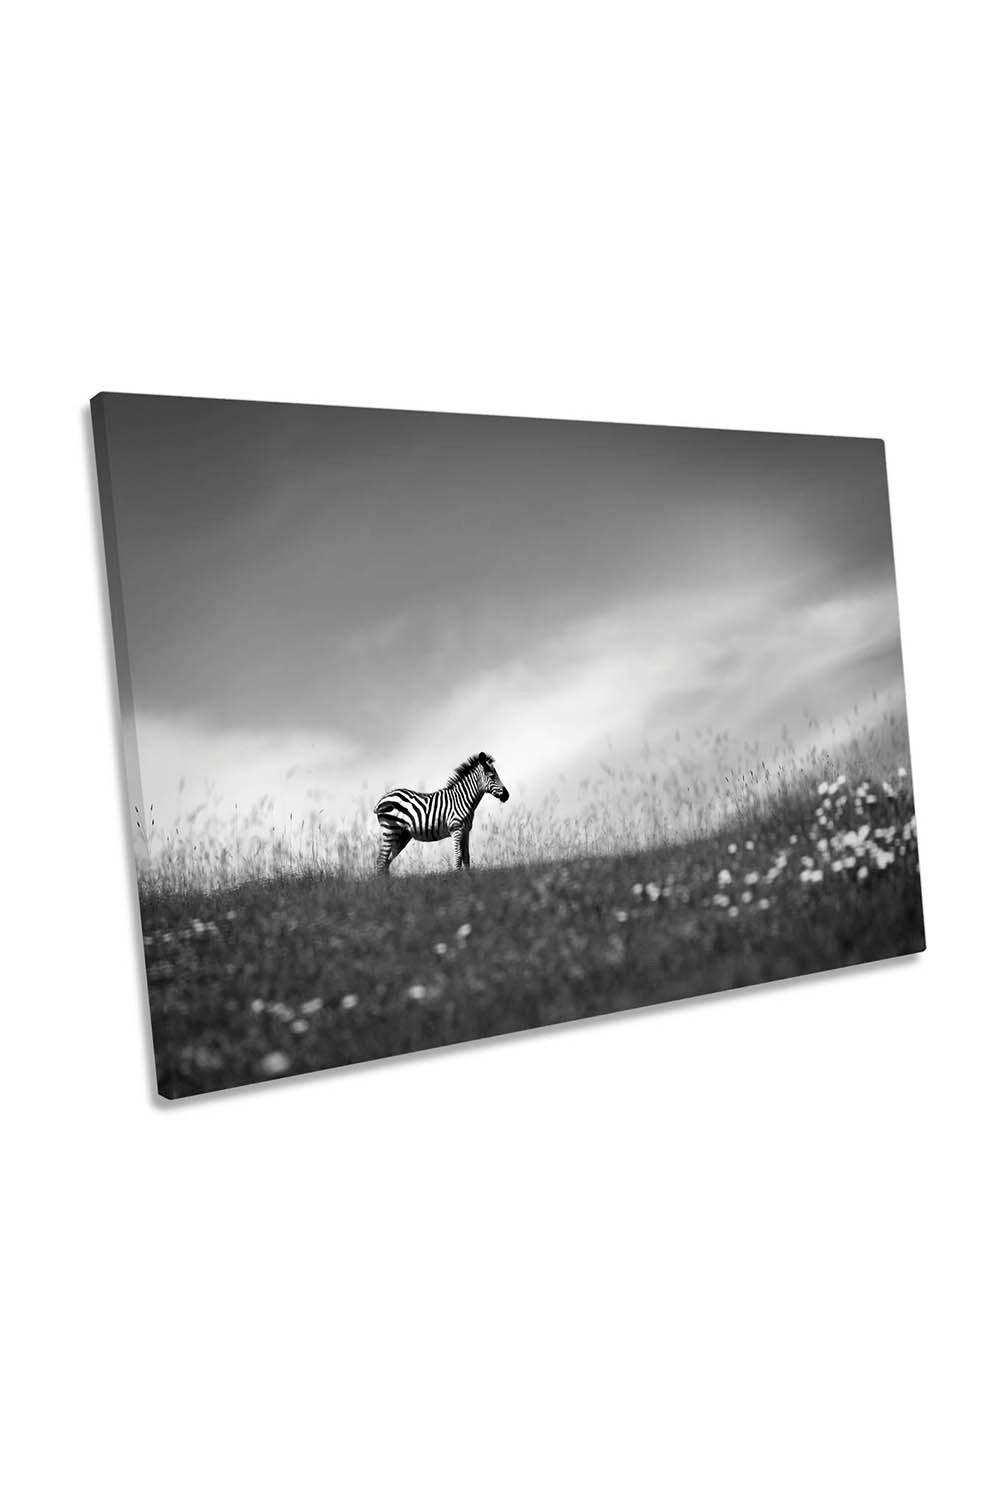 Zebra Stands on the Hill Wildlife Canvas Wall Art Picture Print